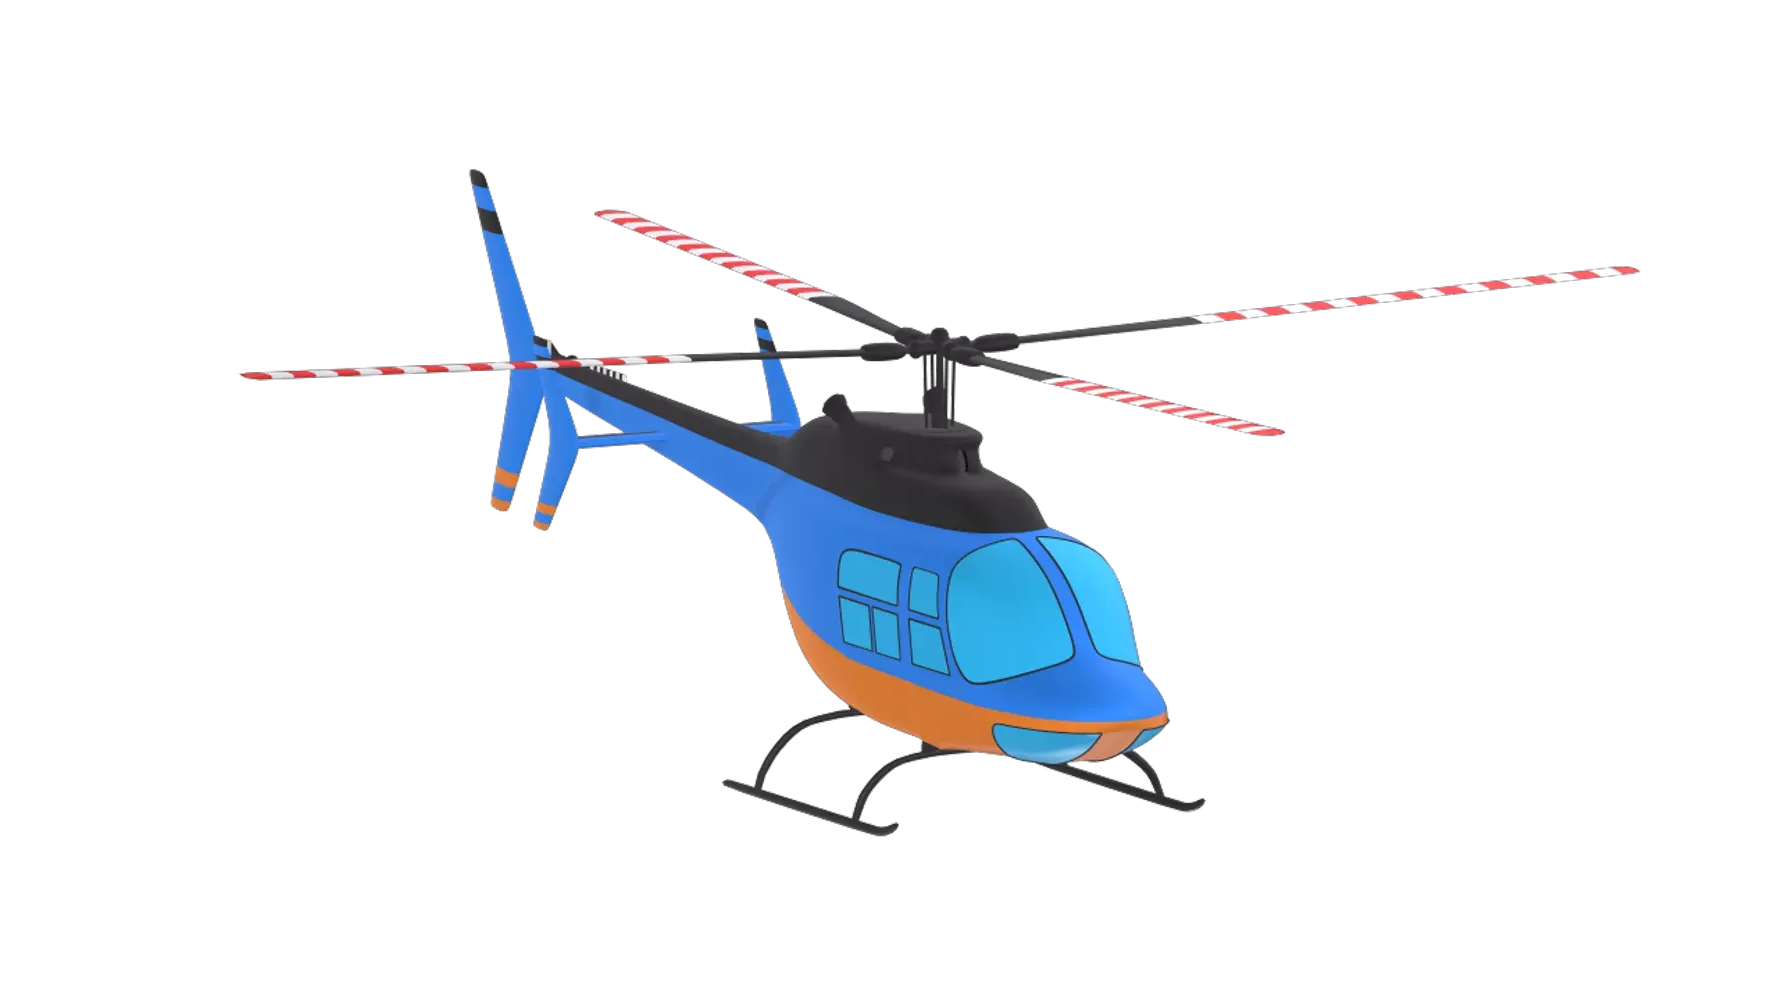 Helicopter 3d model--fbfb1237-bf8a-4160-9412-f891f2c7bda4